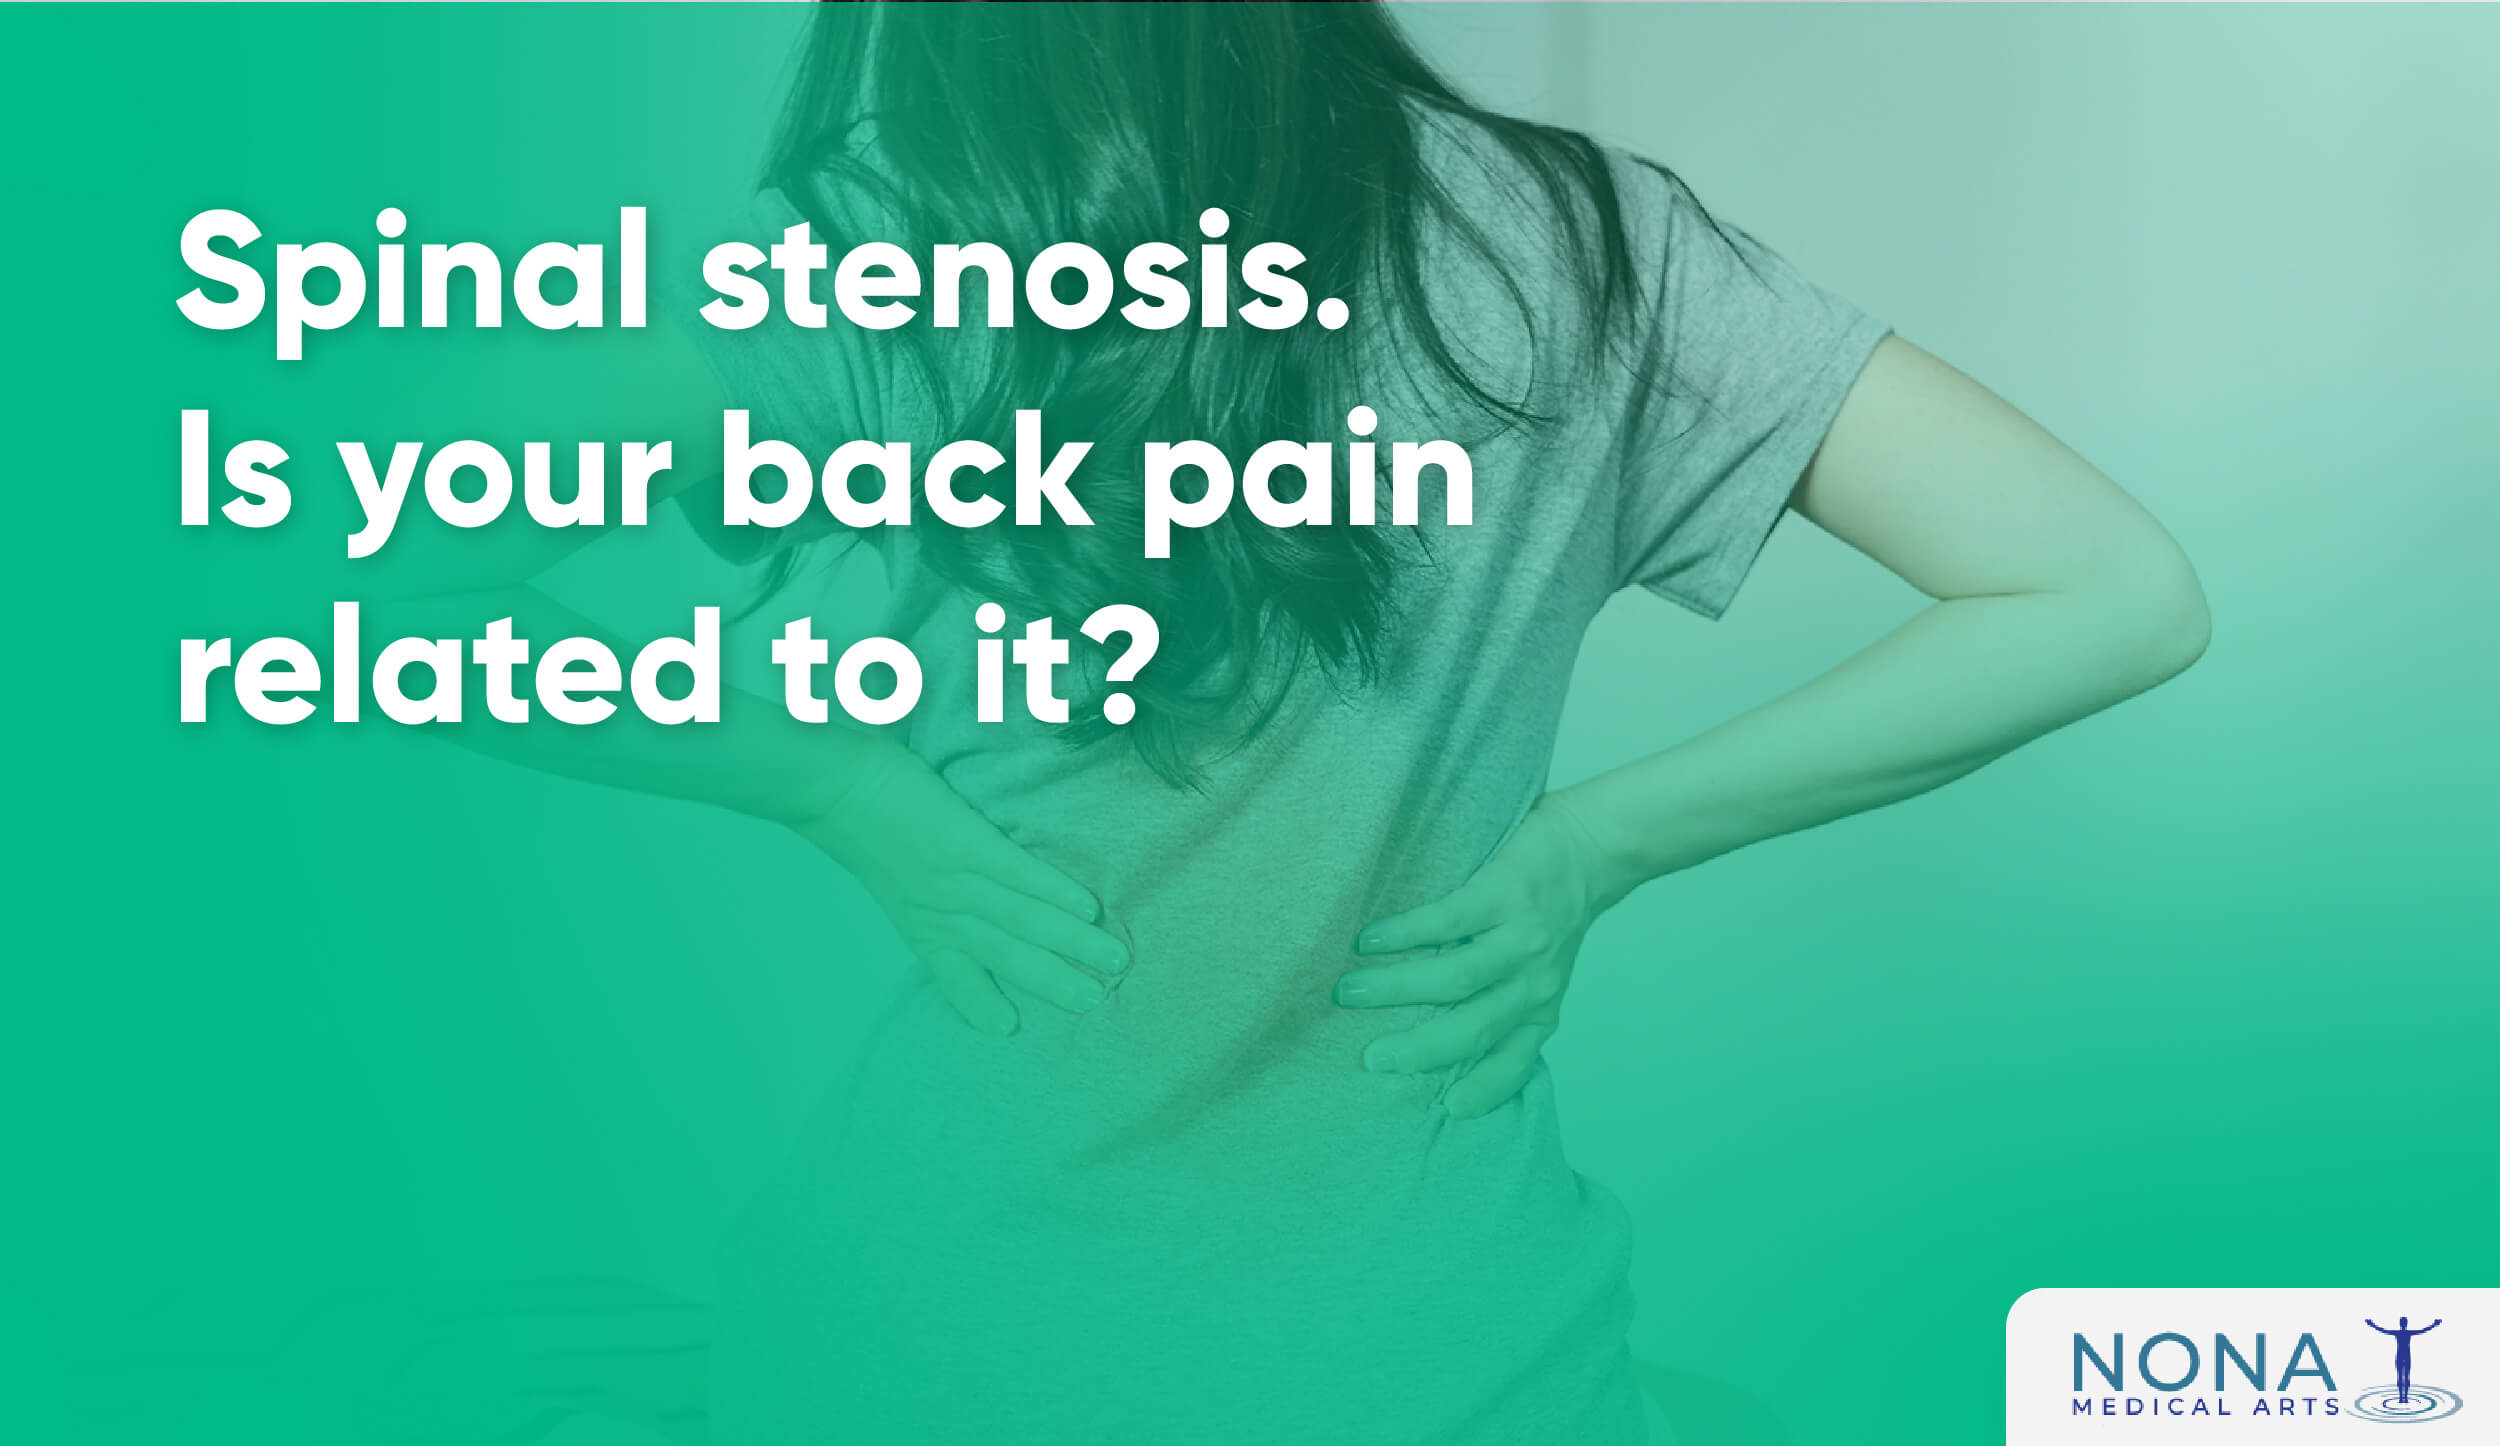 spinal stenosis back pain